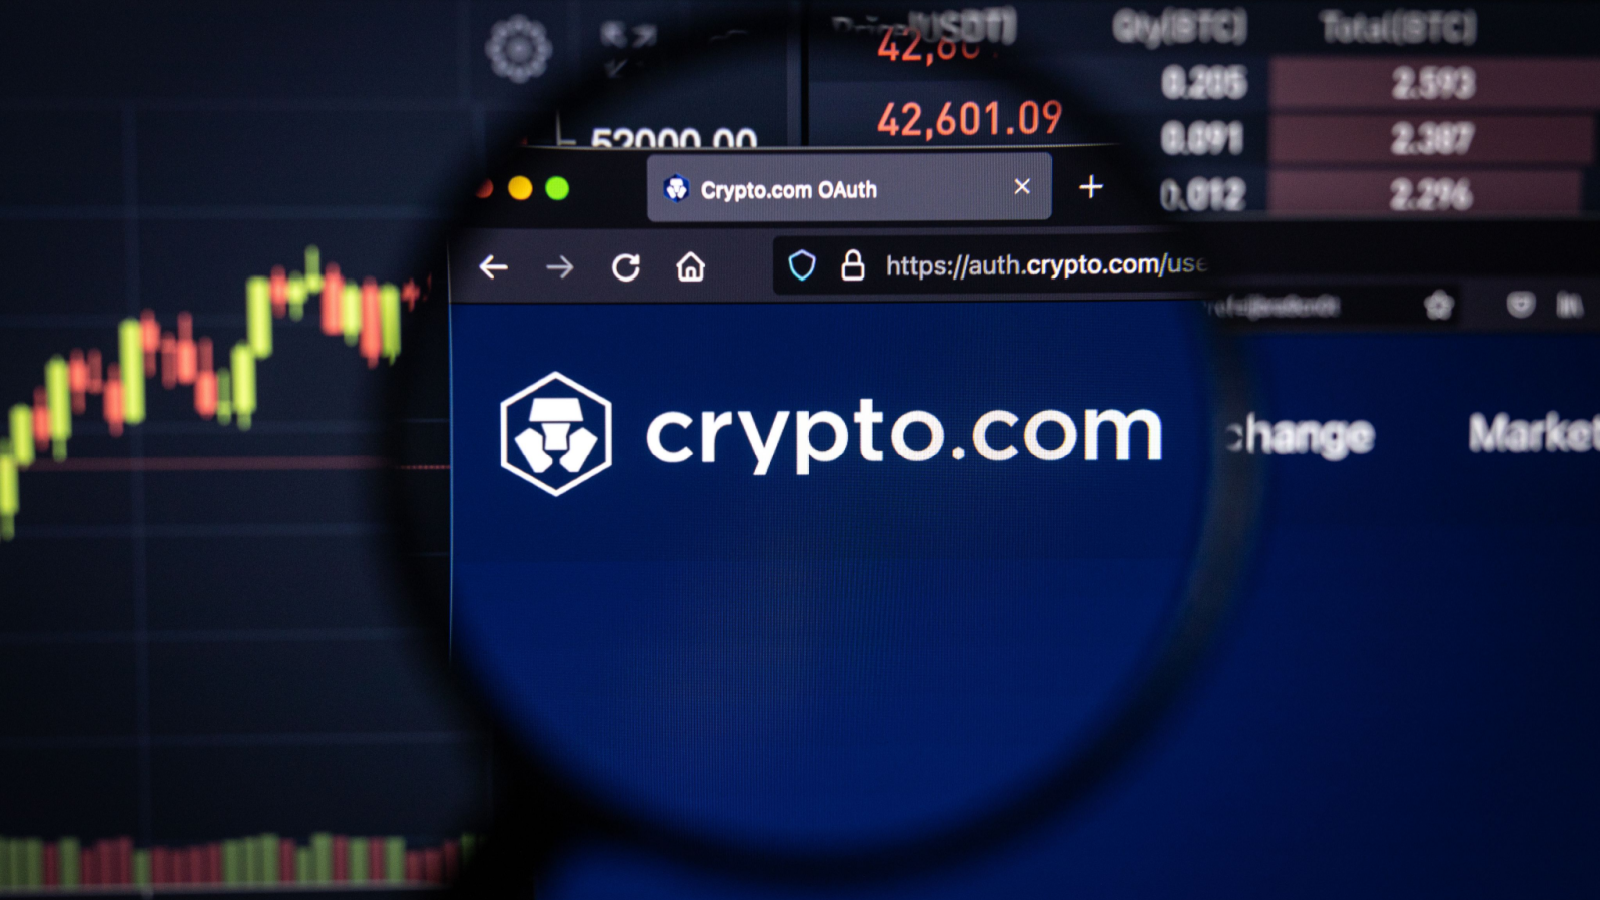 Cronos Price Predictions Crypto.com company logo on a website with blurry stock market developments in the background, seen on a computer screen through a magnifying glass.